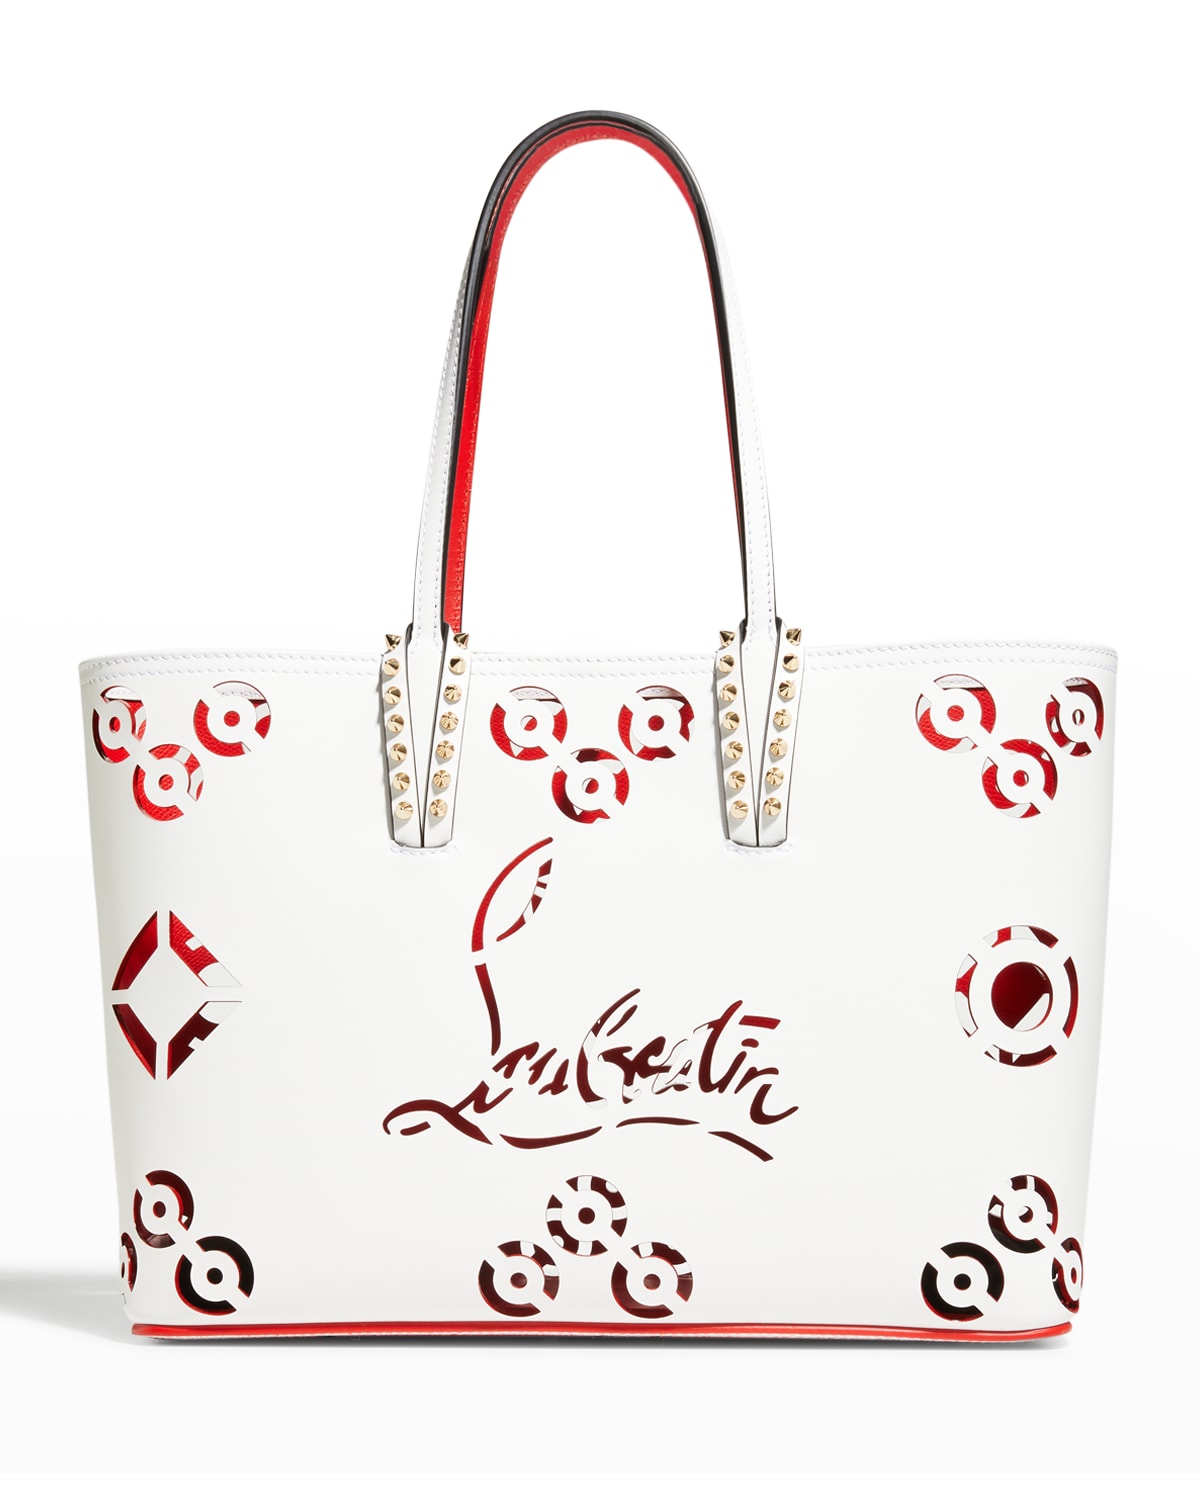 Christian Louboutin Cabata Small Perforated Loubinthesky Leather Tote Bag